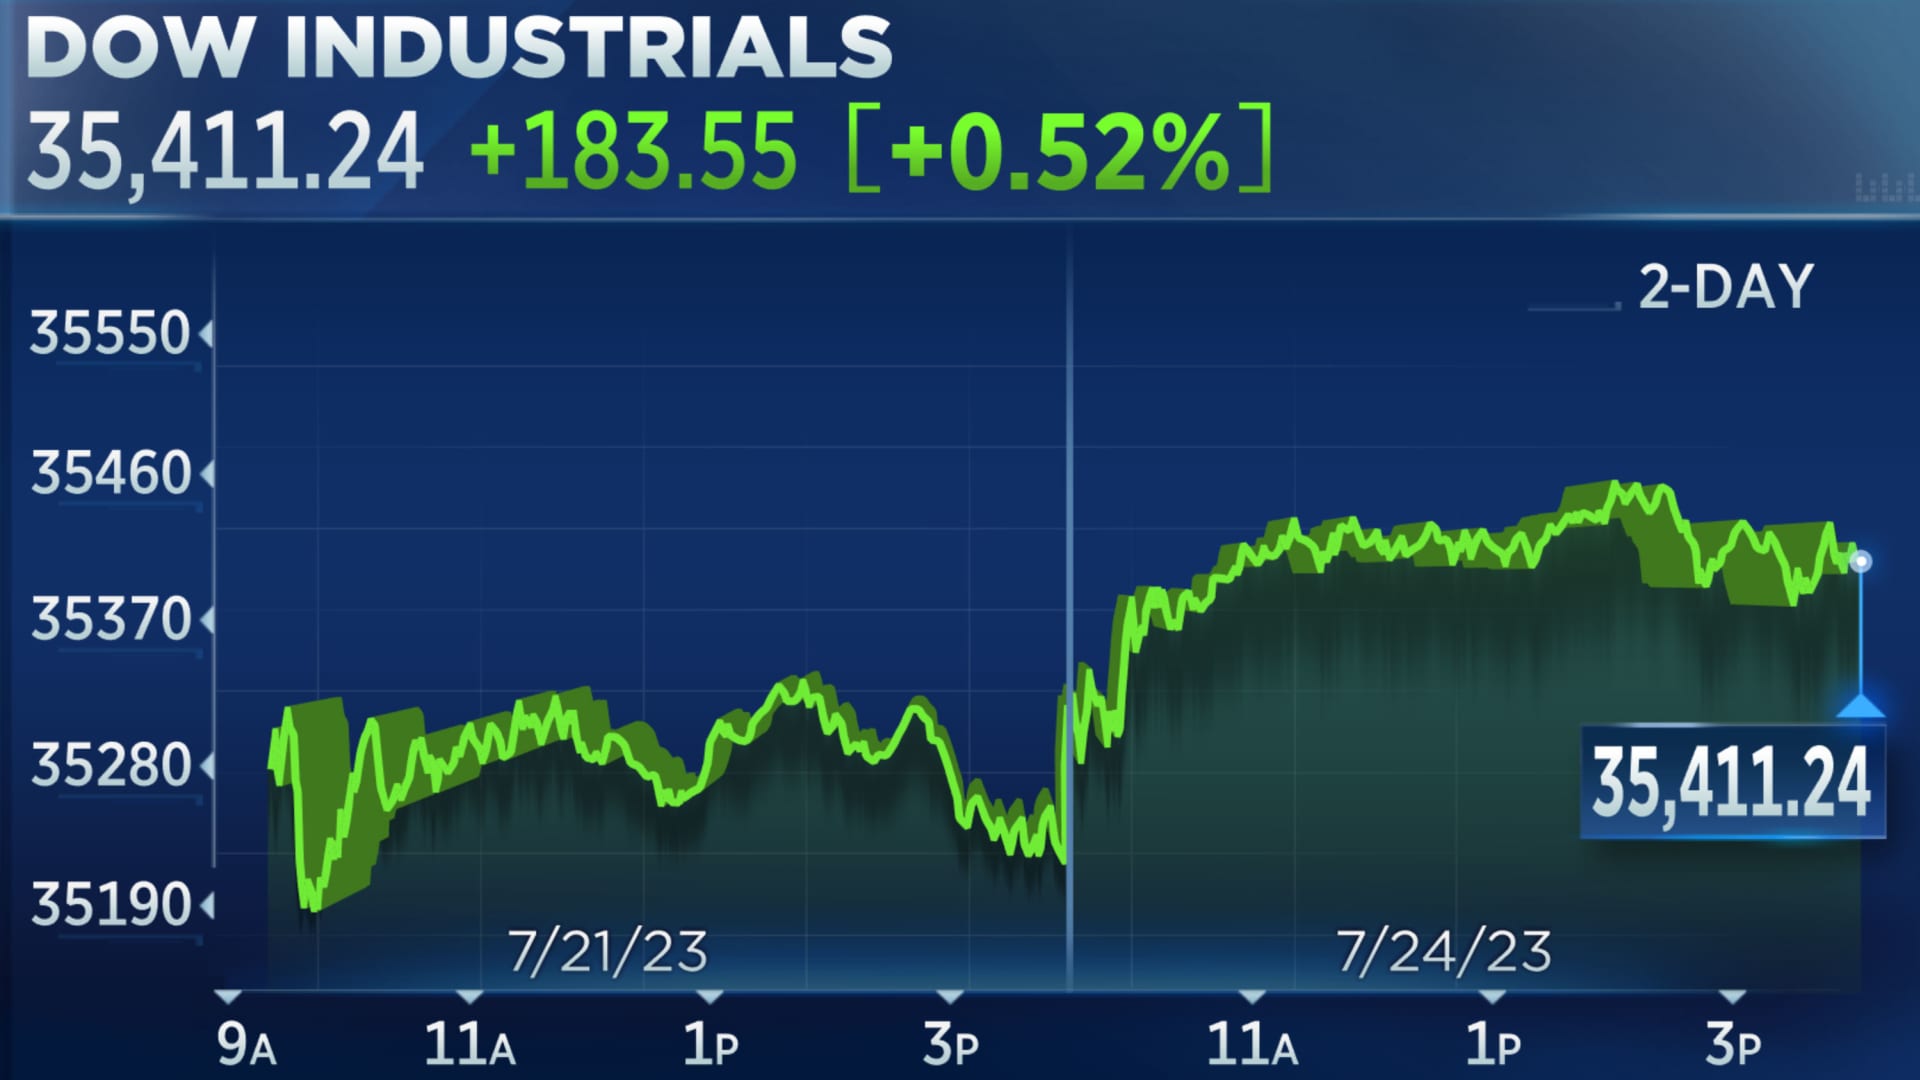 Dow rises nearly 200 points, extends rally to 11 days for longest winning streak in six years: Live updates 